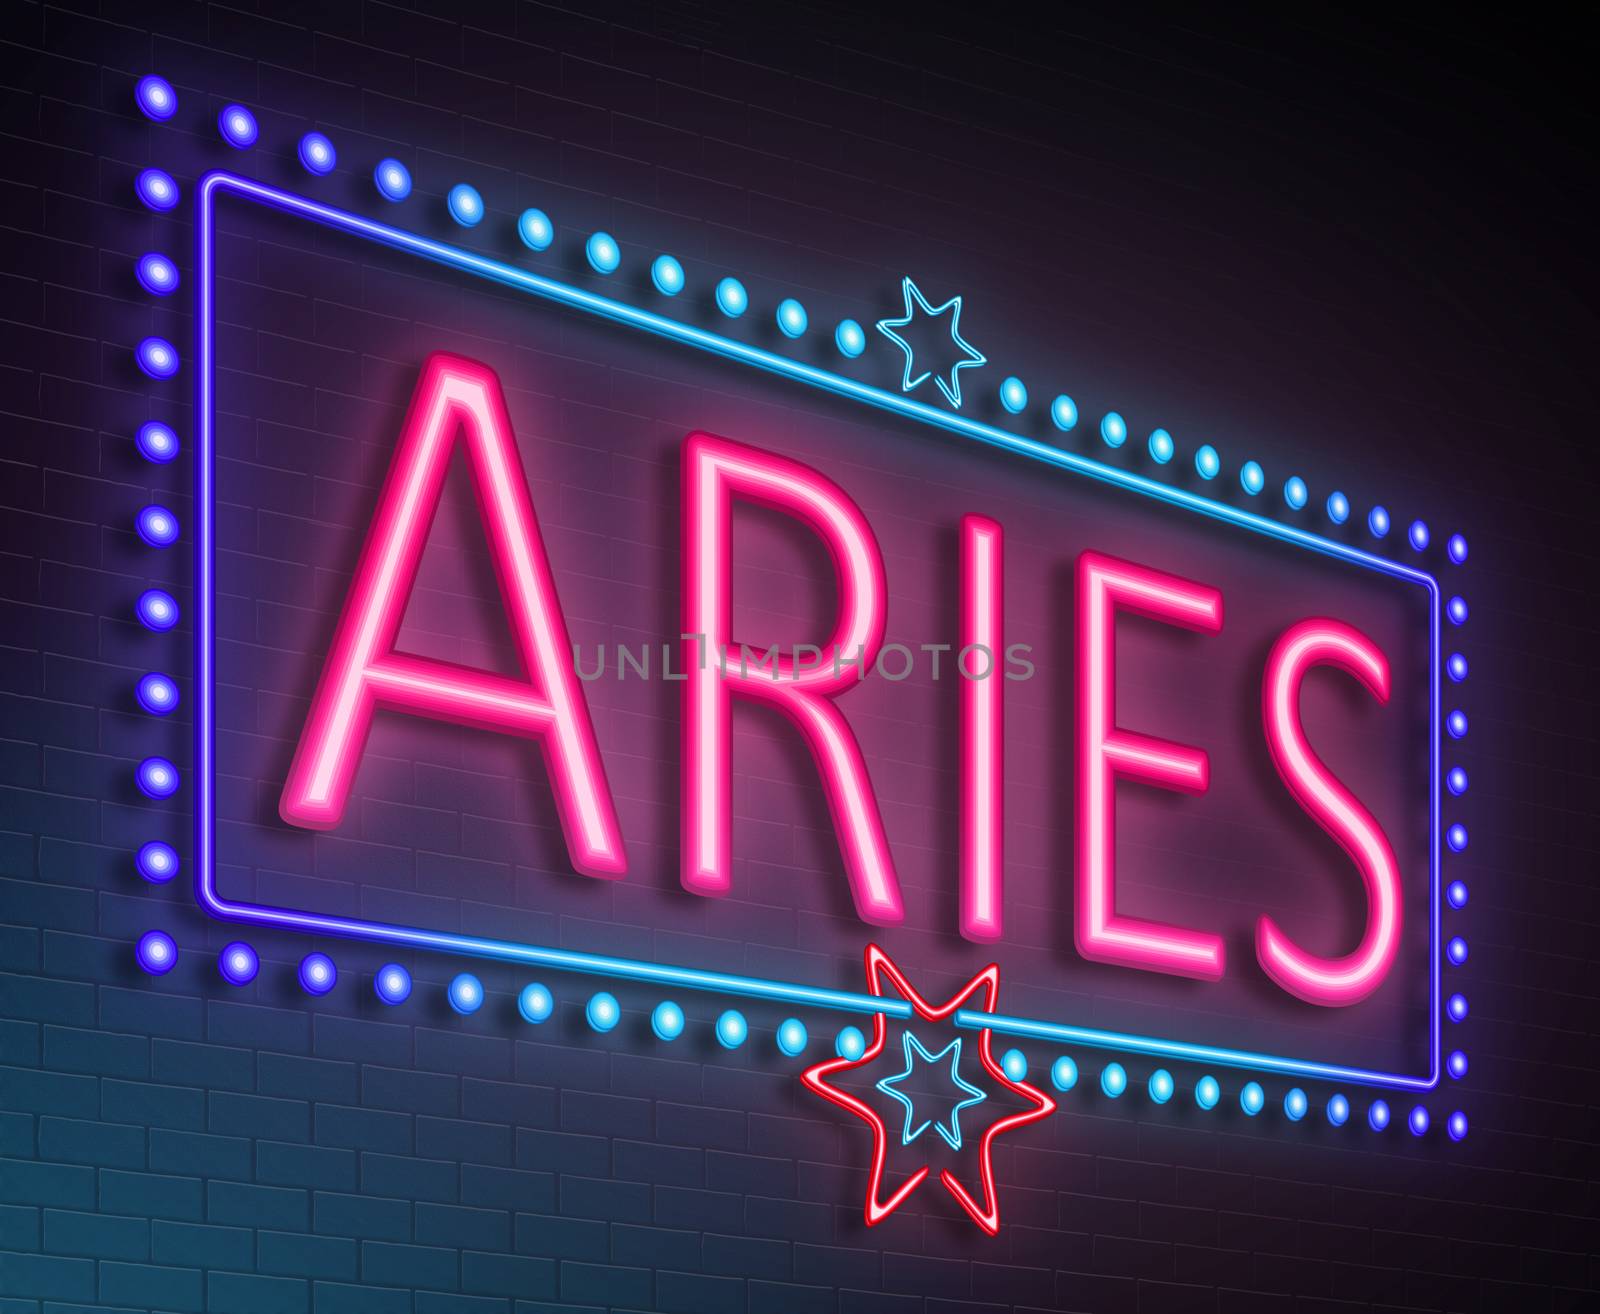 Aries neon sign. by 72soul